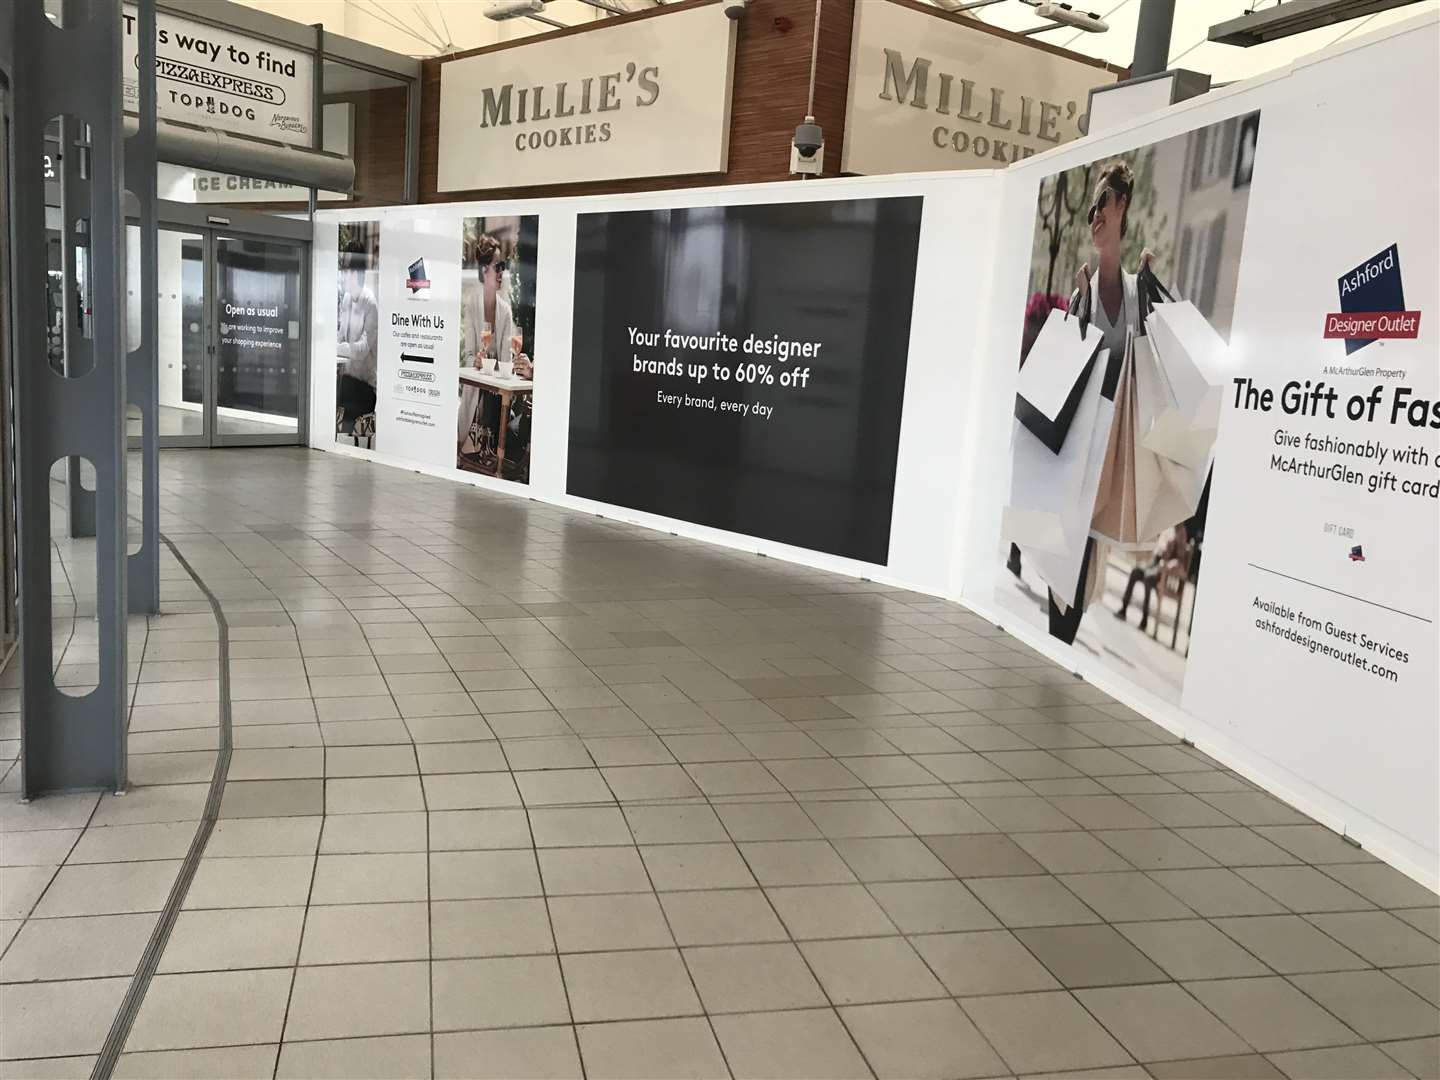 The Outlet's former food court is now closed as work begins on the extension